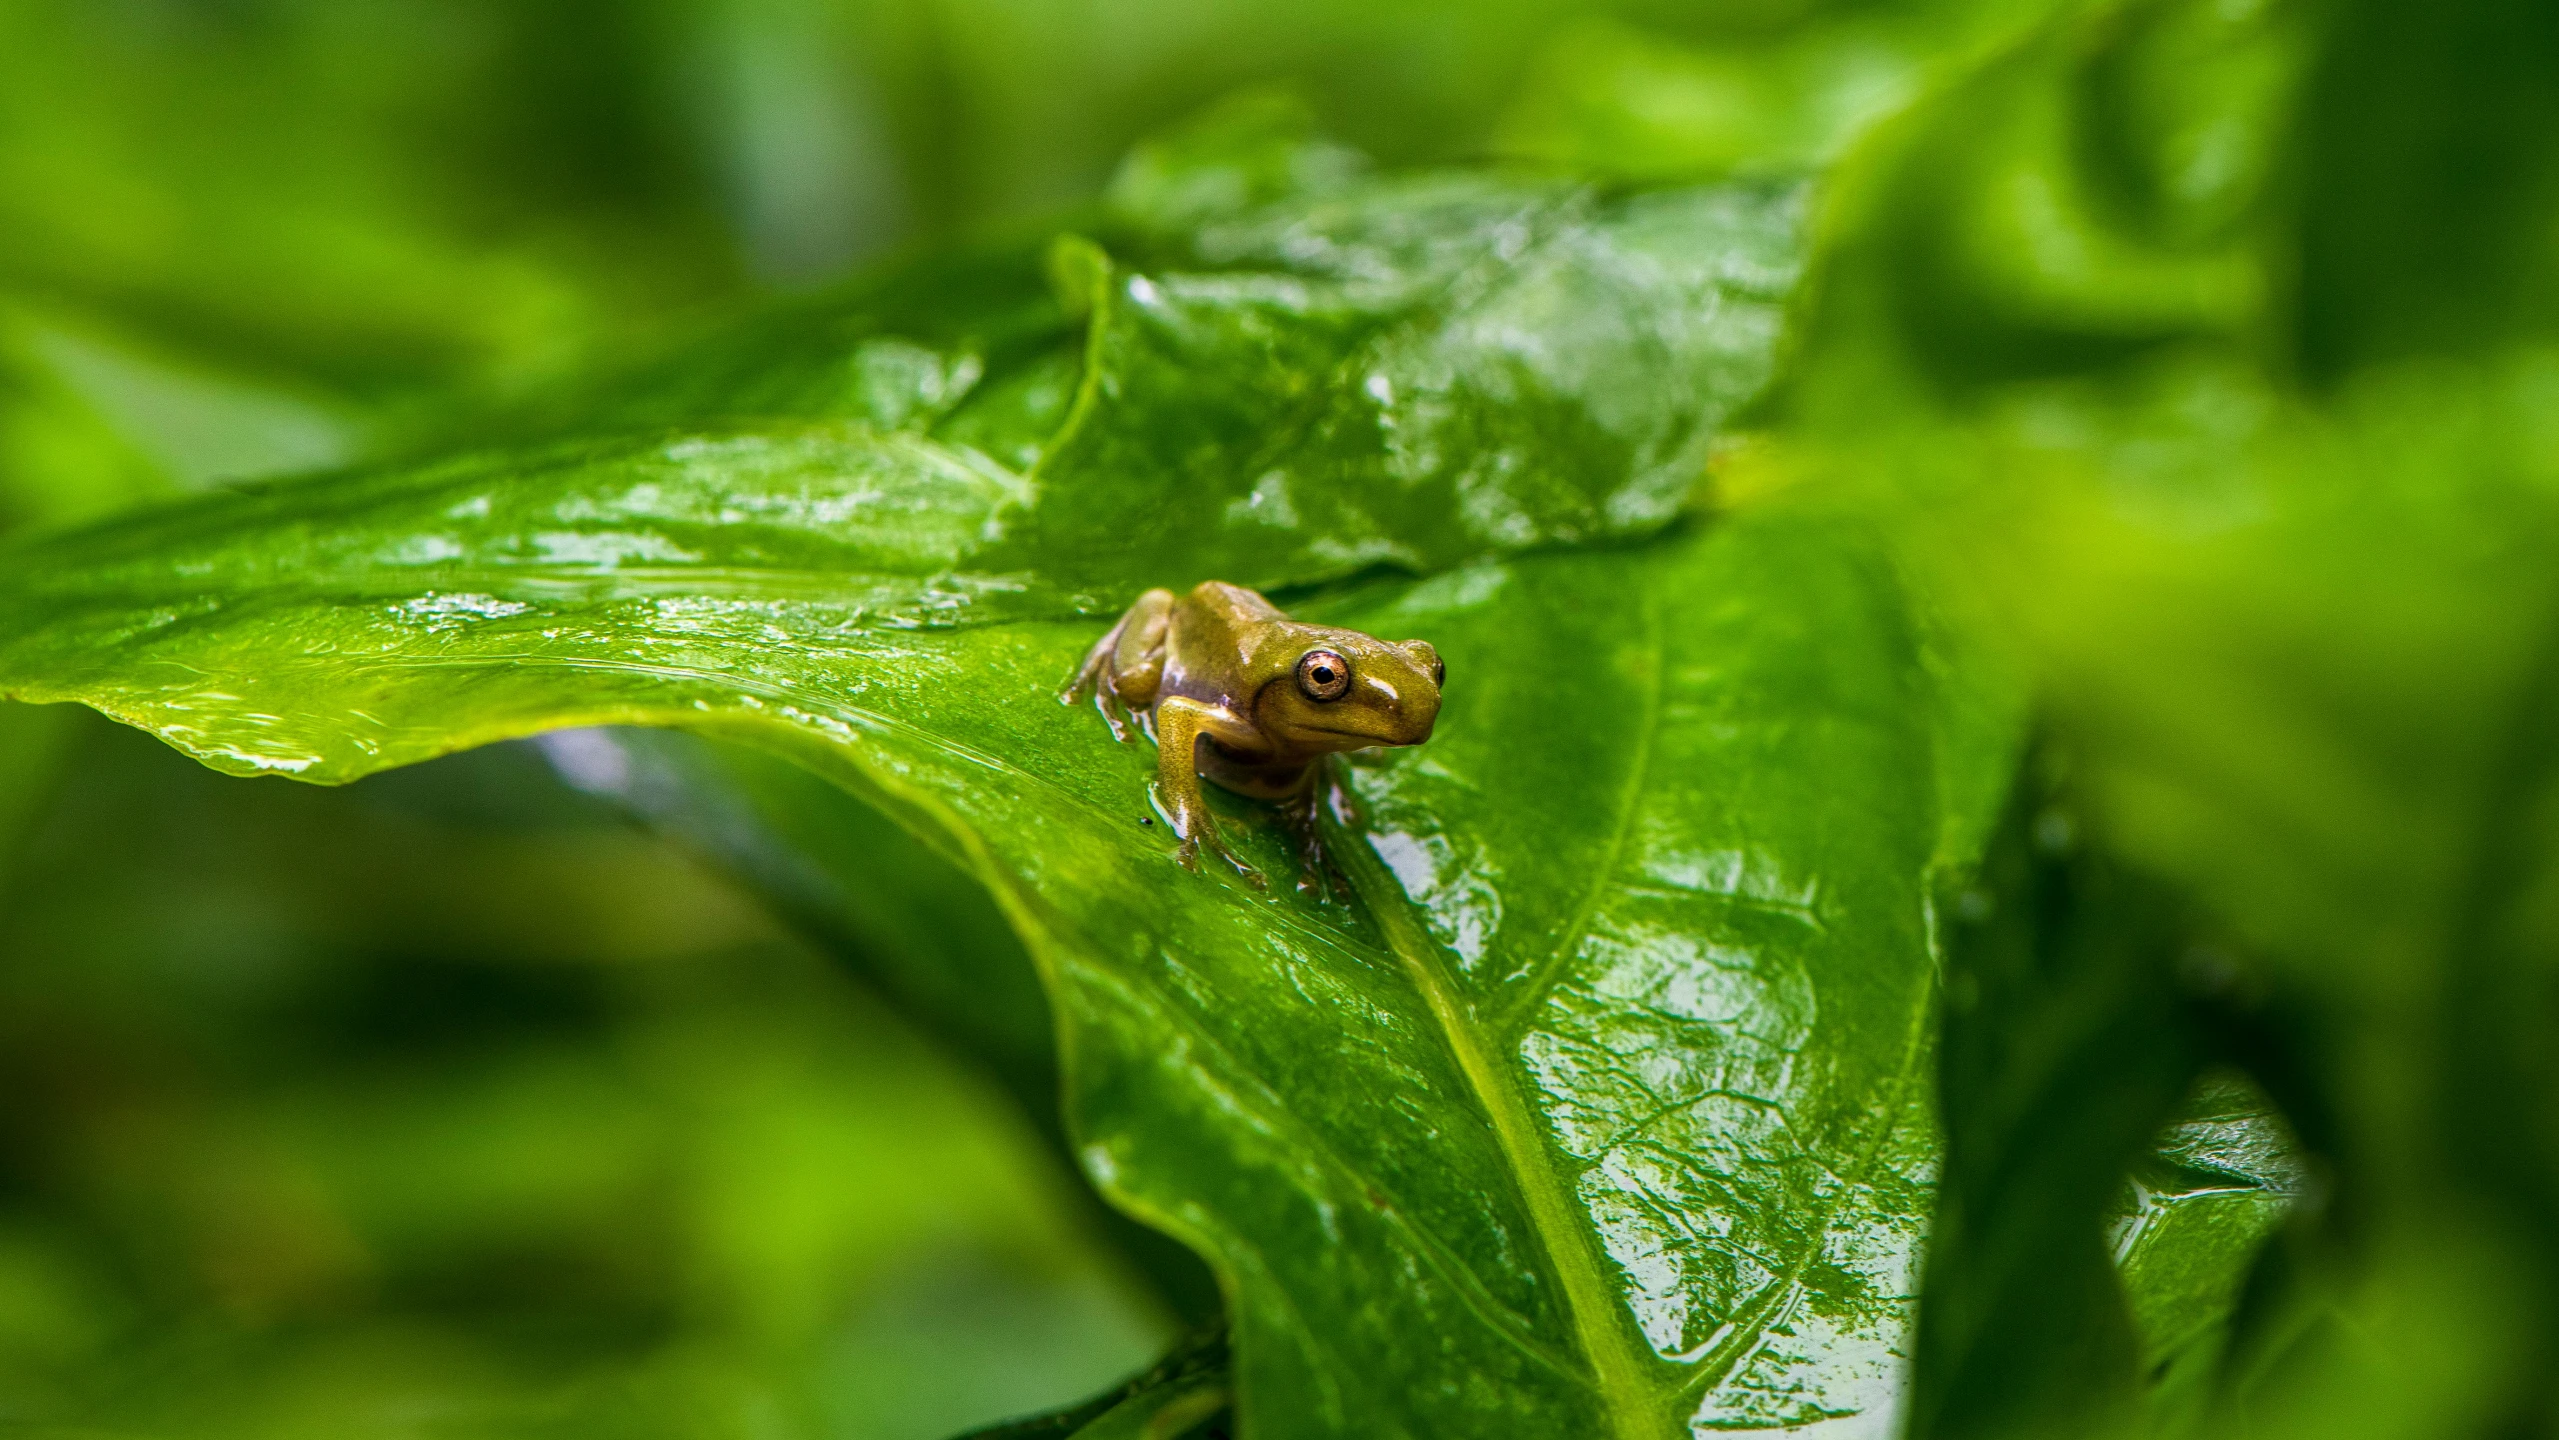 a close - up of a yellow and brown frog sitting on a green leaf